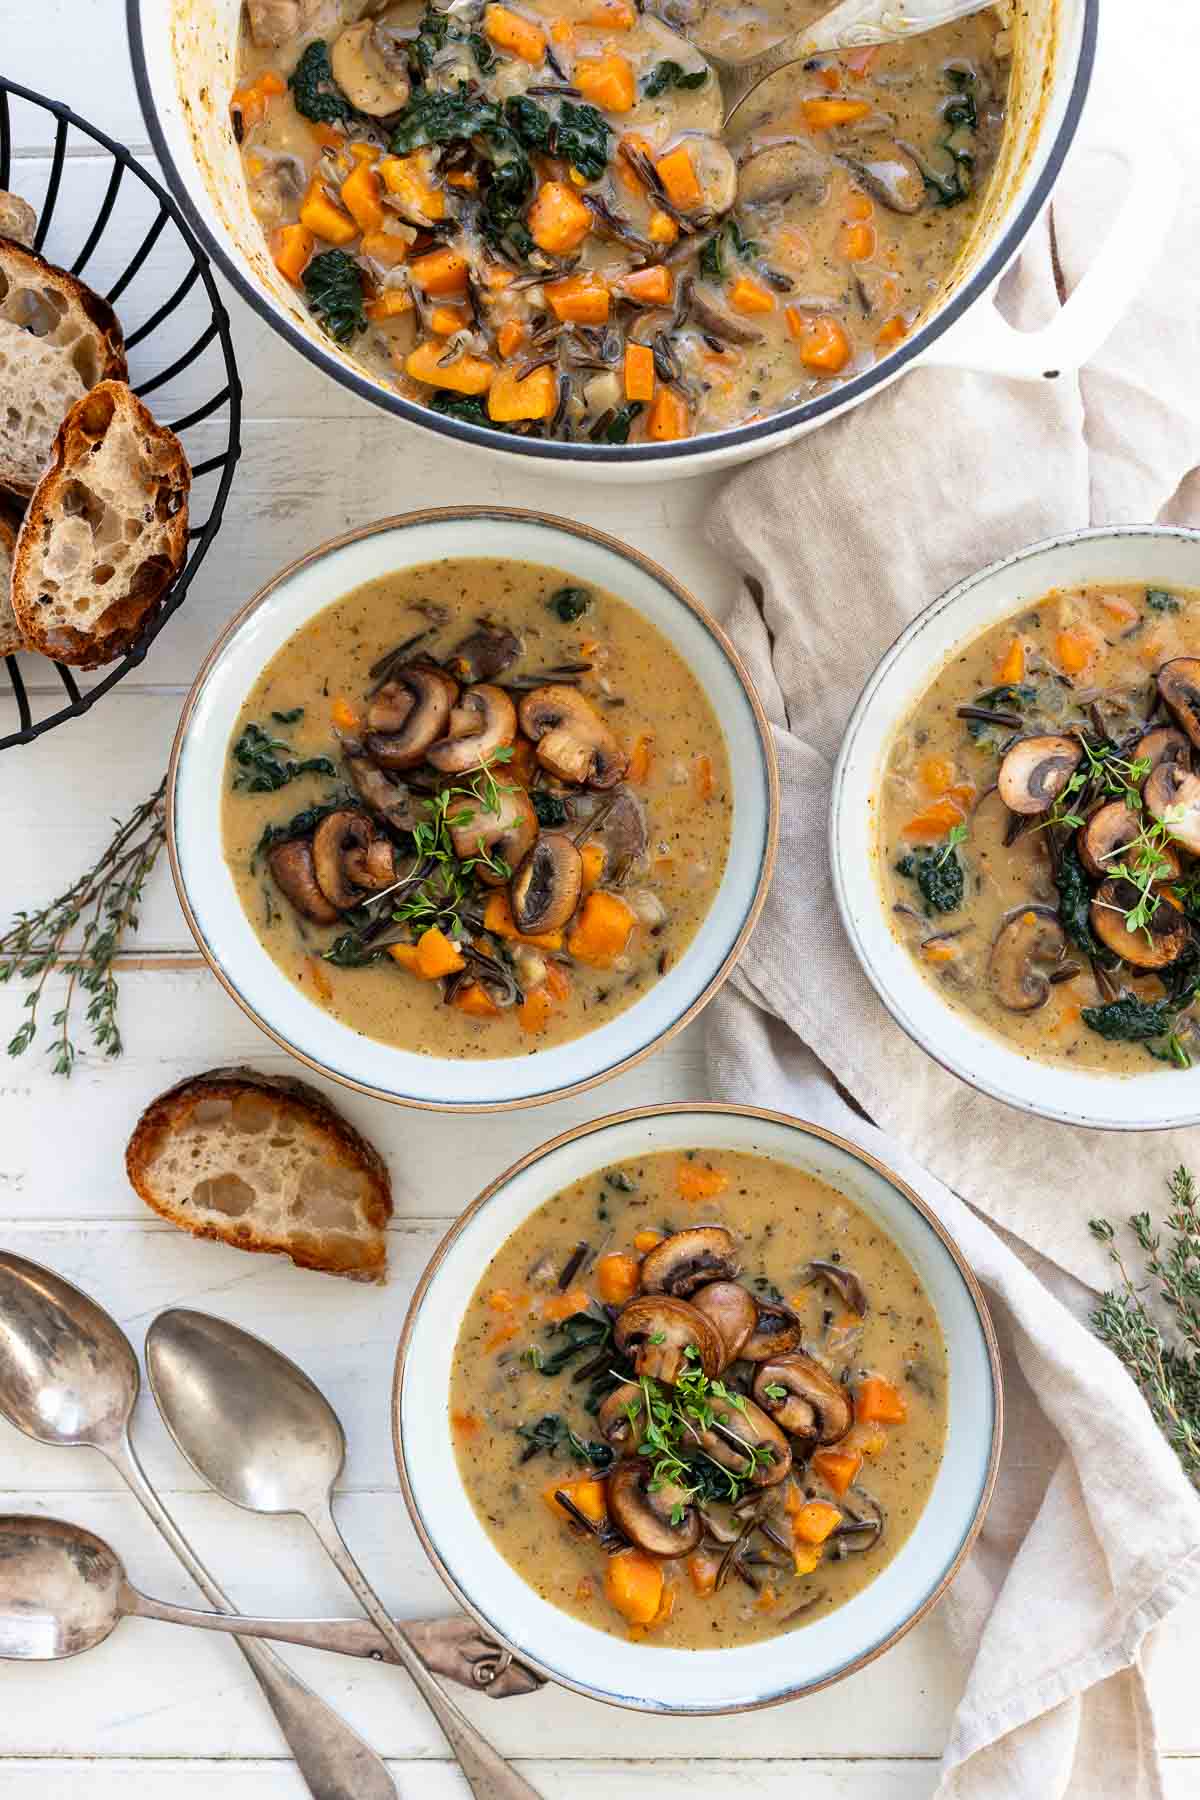 Mushroom and Wild Rice Soup with vegetables and coconut milk